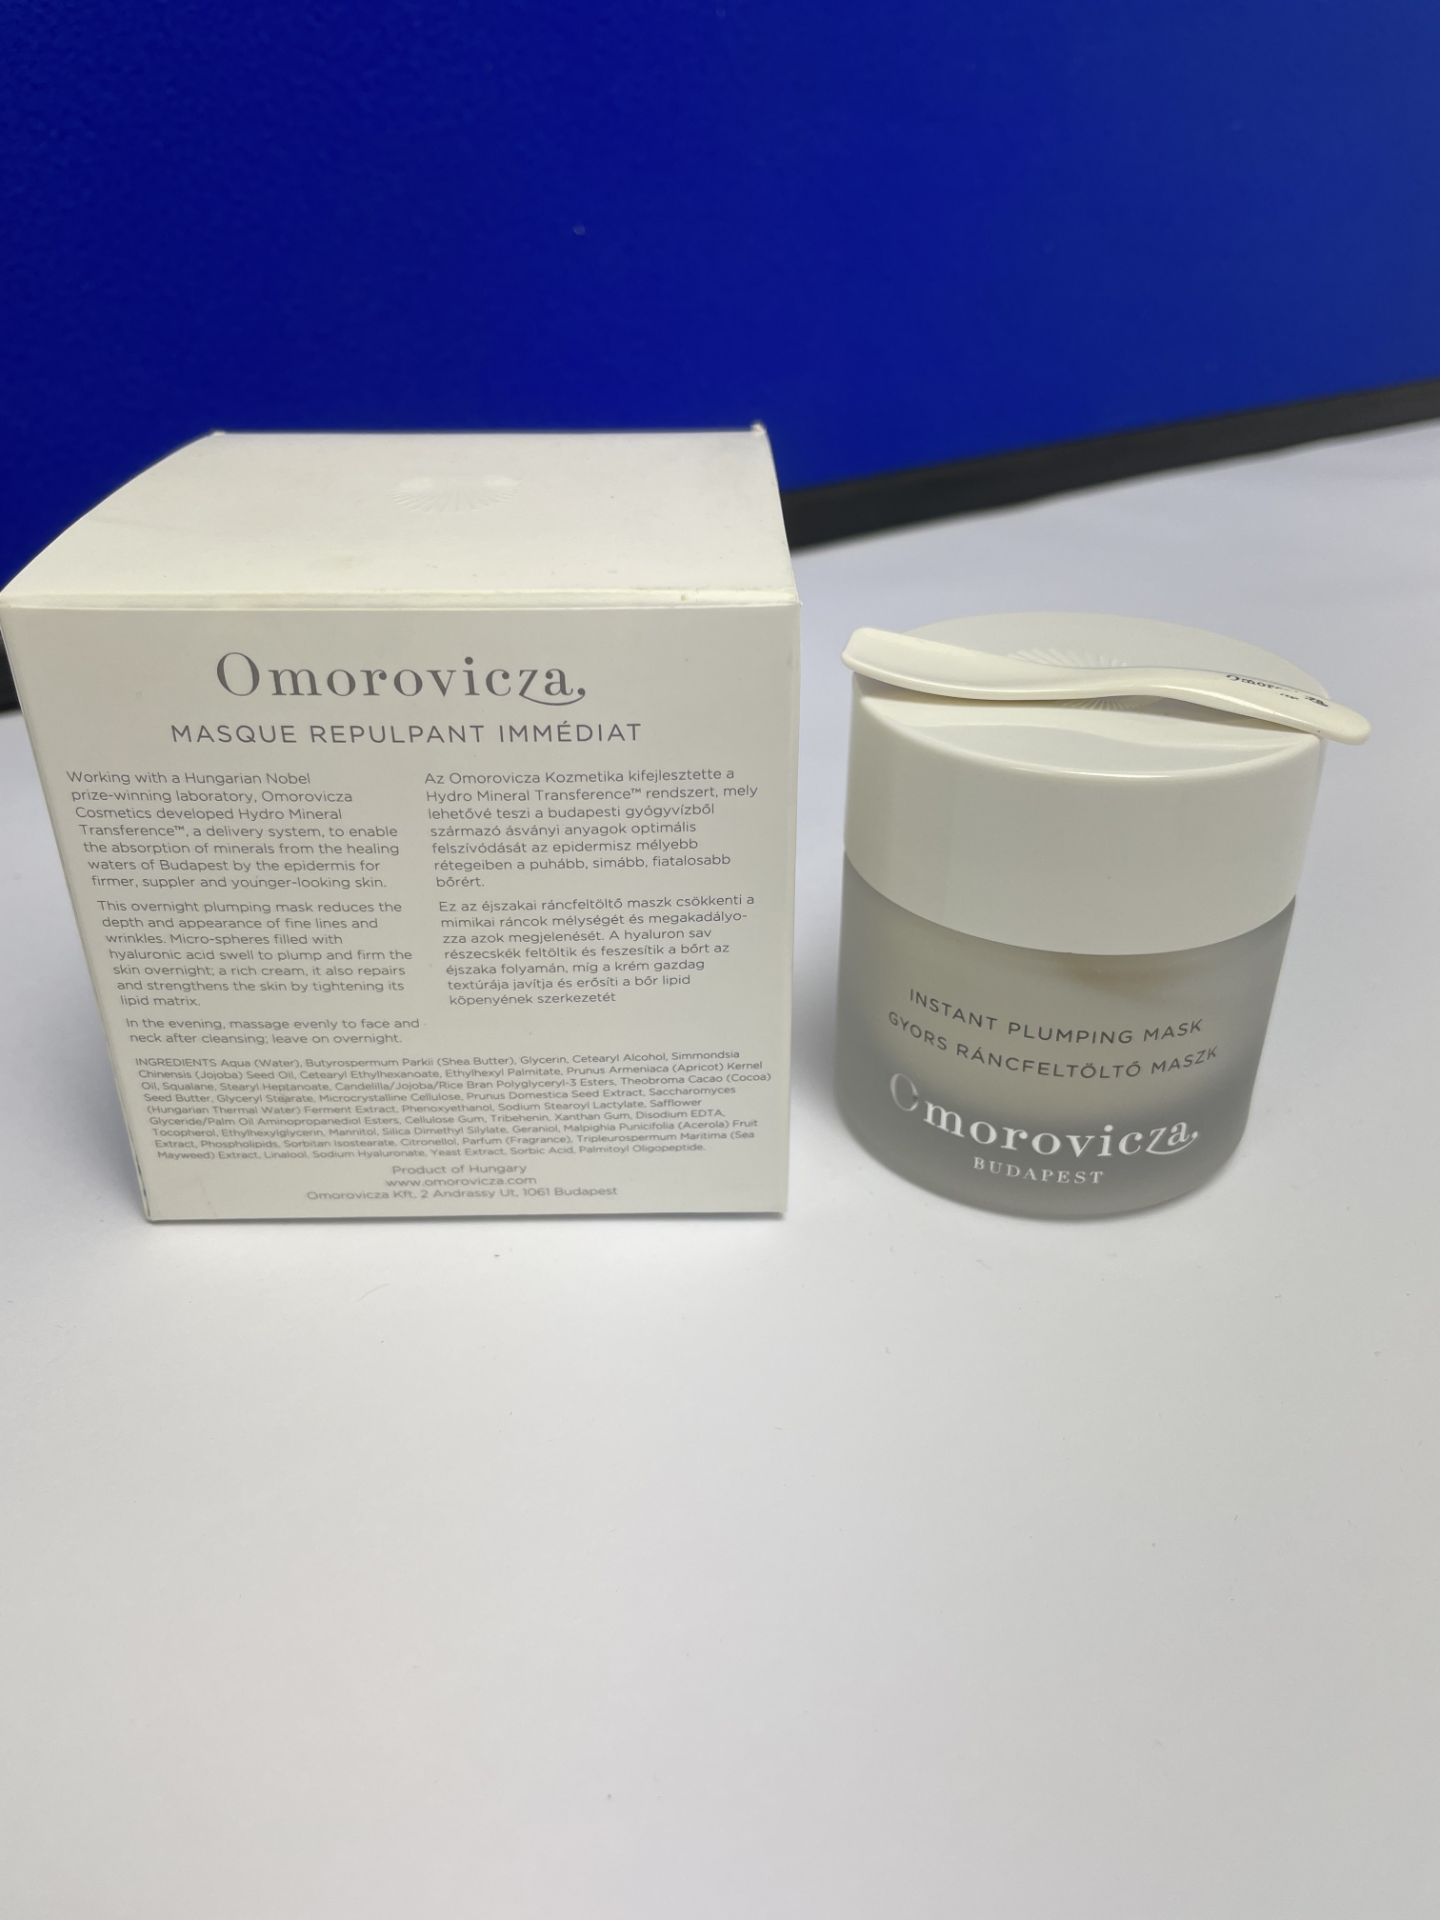 Omorovicza Budapest Instant Plumping Mask | RRP £115.00 - Image 2 of 2